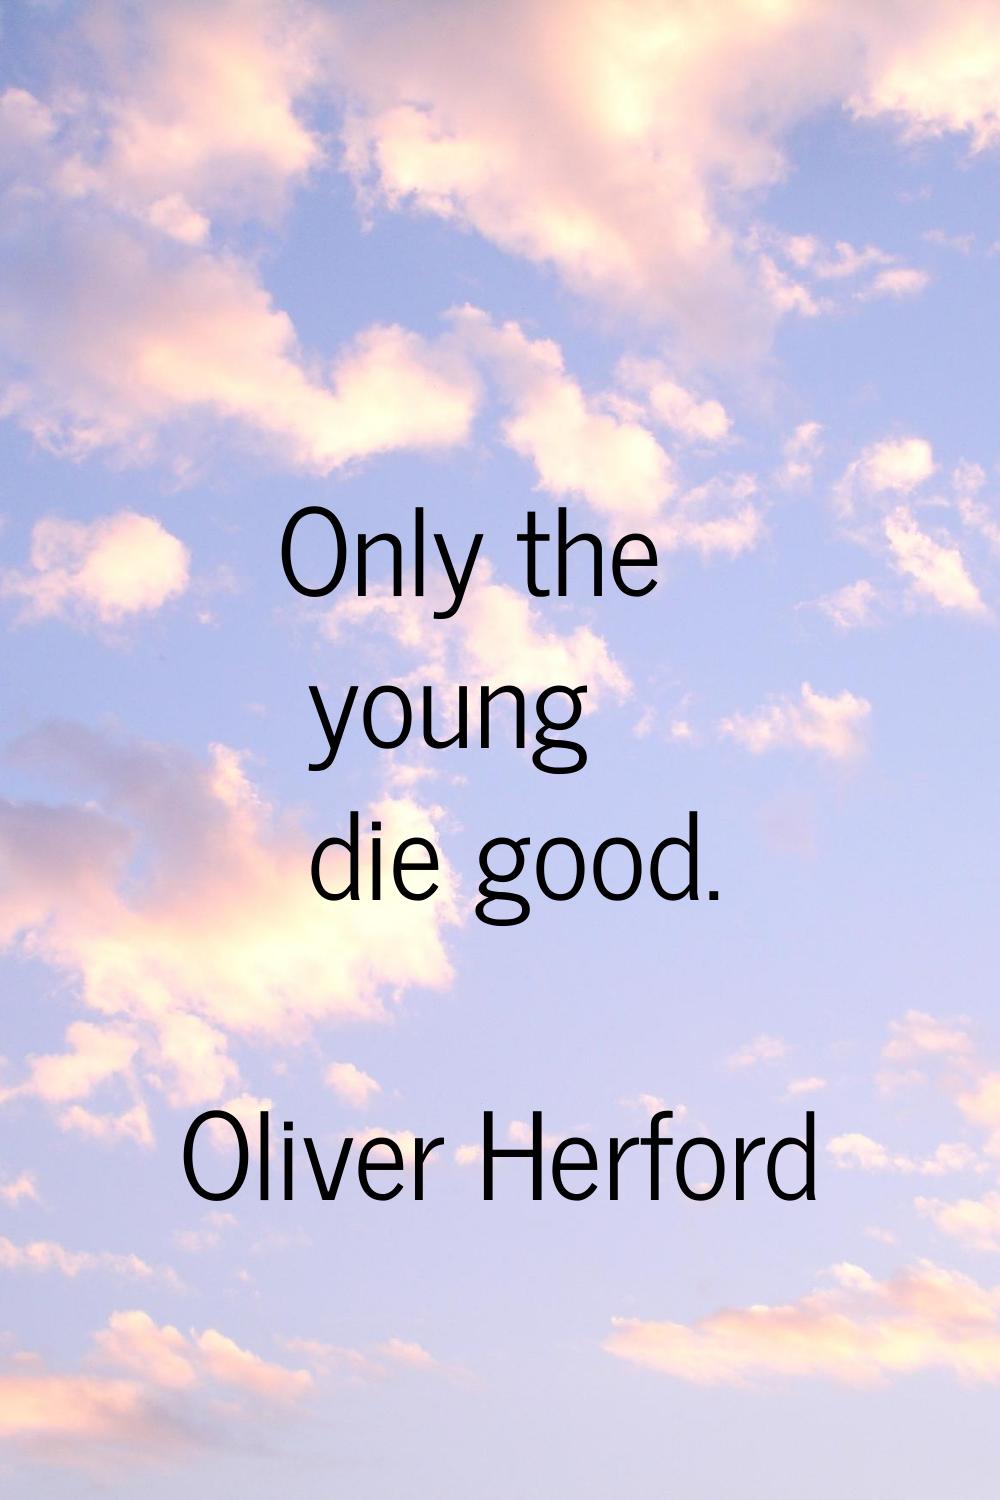 Only the young die good.